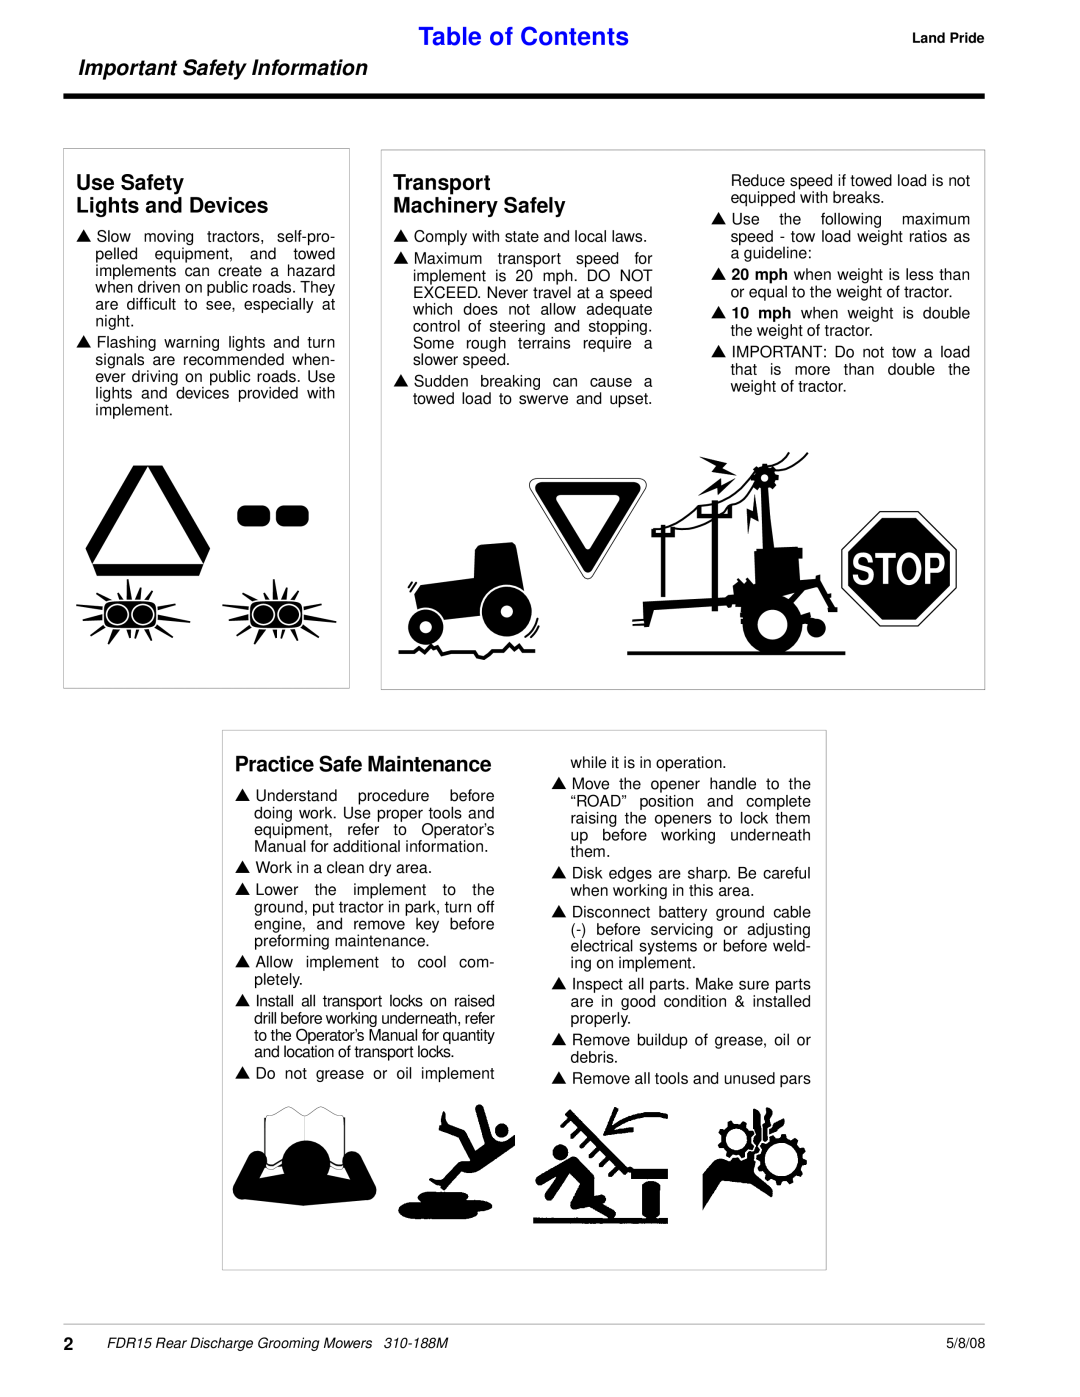 Land Pride FDR15 Use Safety Lights and Devices, Transport Machinery Safely, Practice Safe Maintenance, Table of Contents 